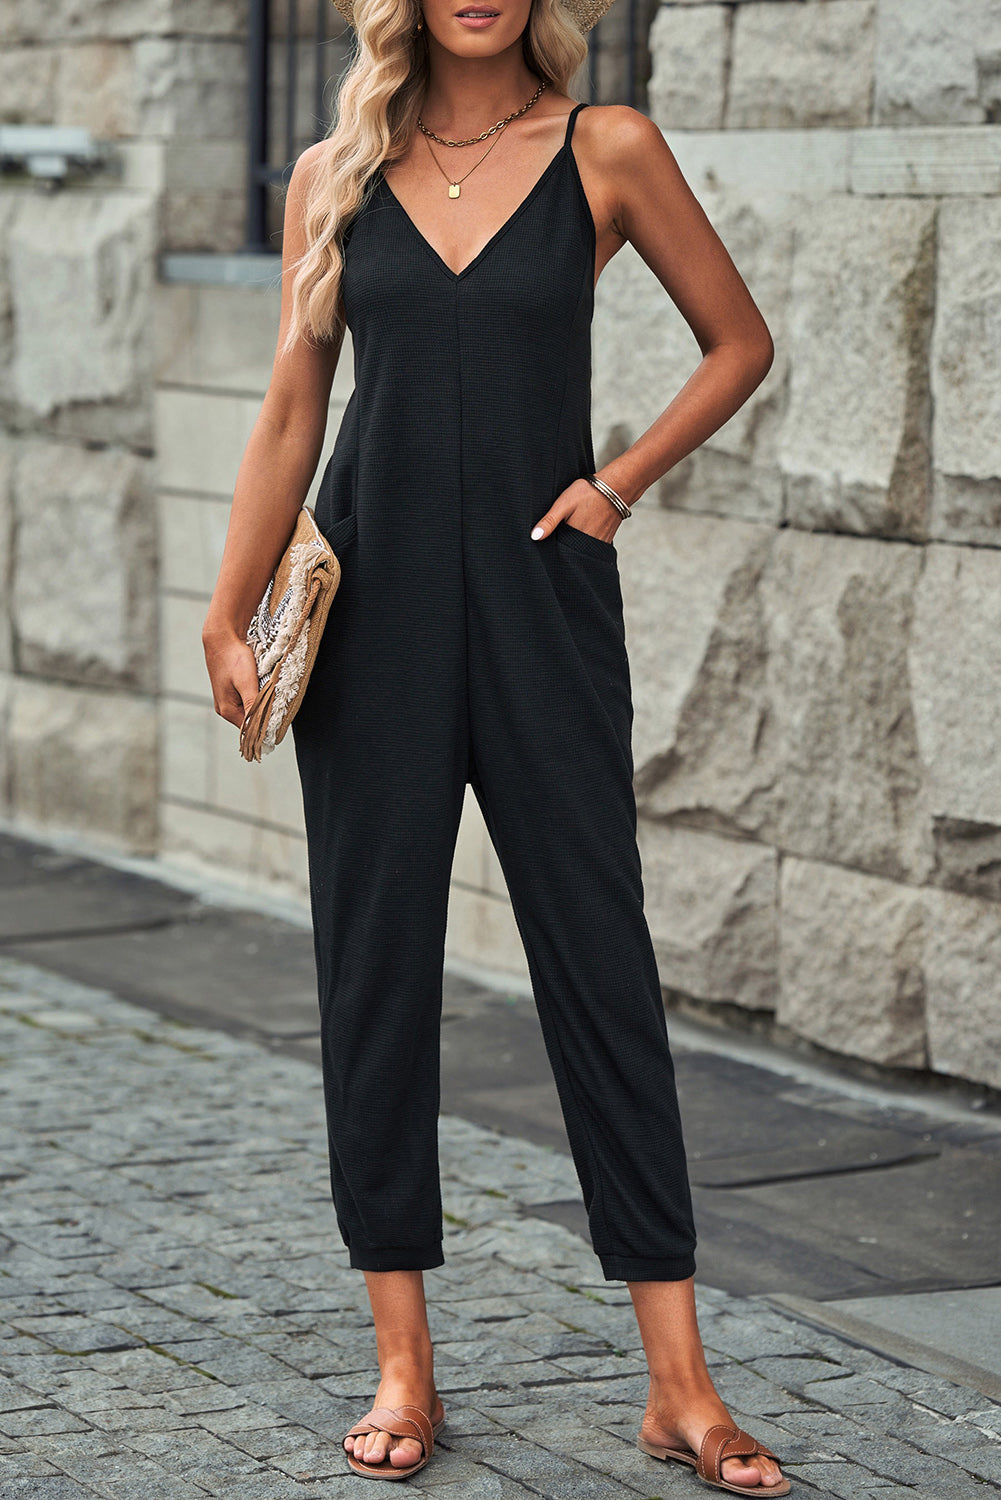 Black textured sleeveless v - neck pocketed casual jumpsuit - s 95% polyester + 5% elastane jumpsuits & rompers